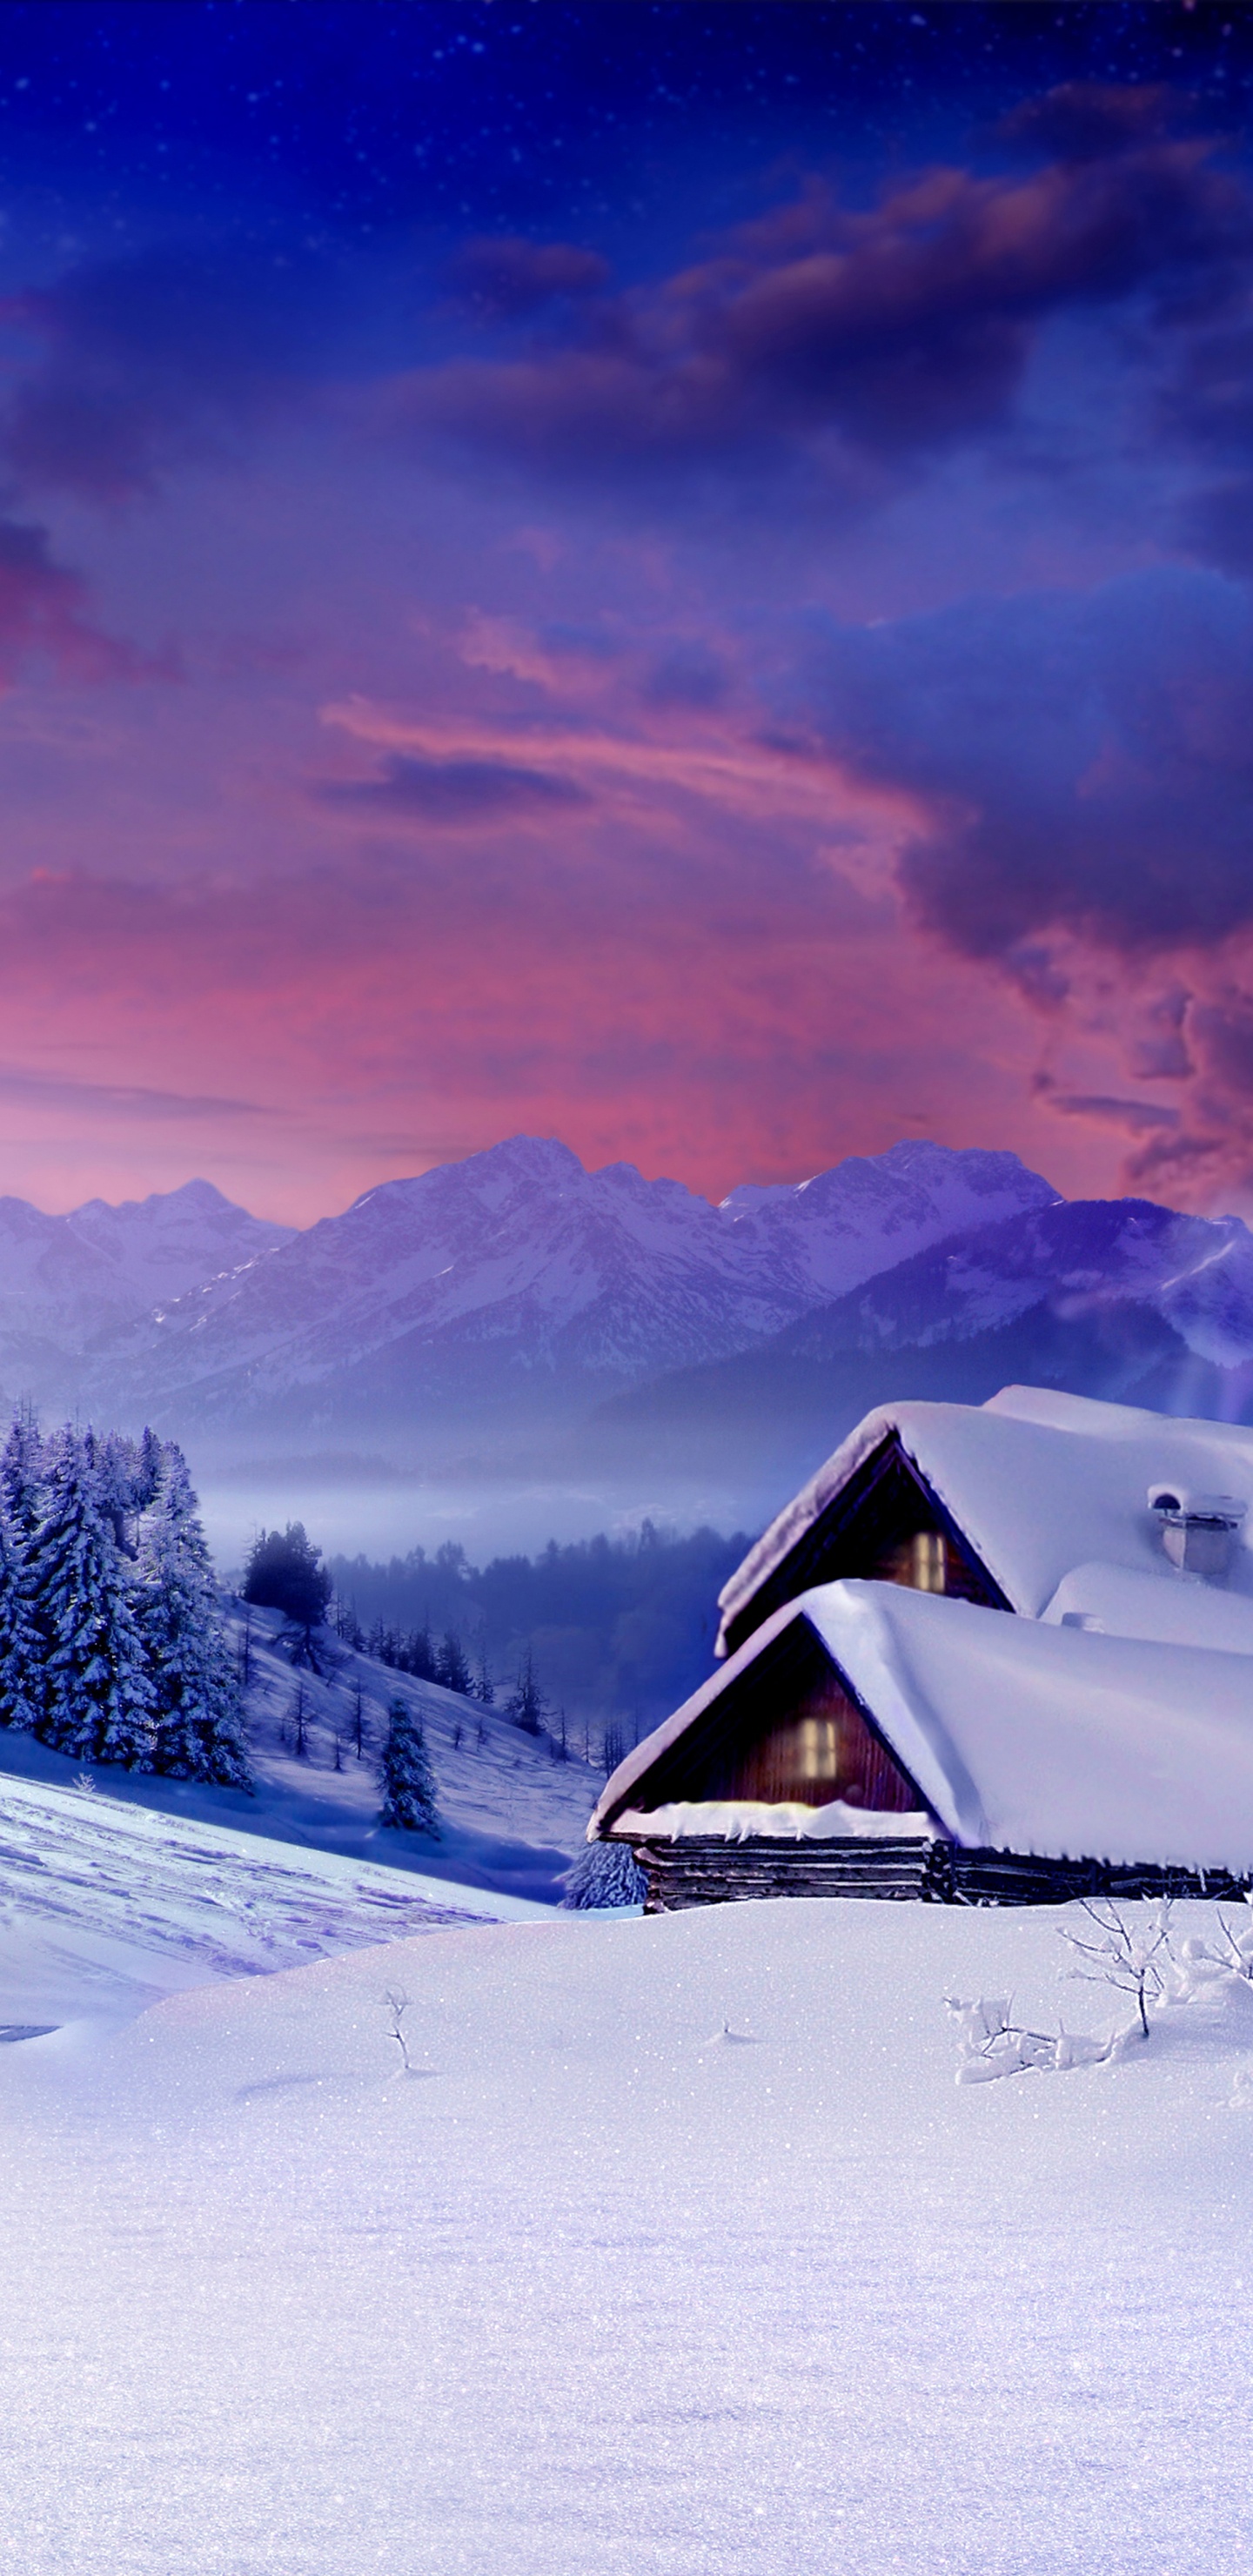 Brown Wooden House on Snow Covered Ground Near Trees and Mountains During Daytime. Wallpaper in 1440x2960 Resolution